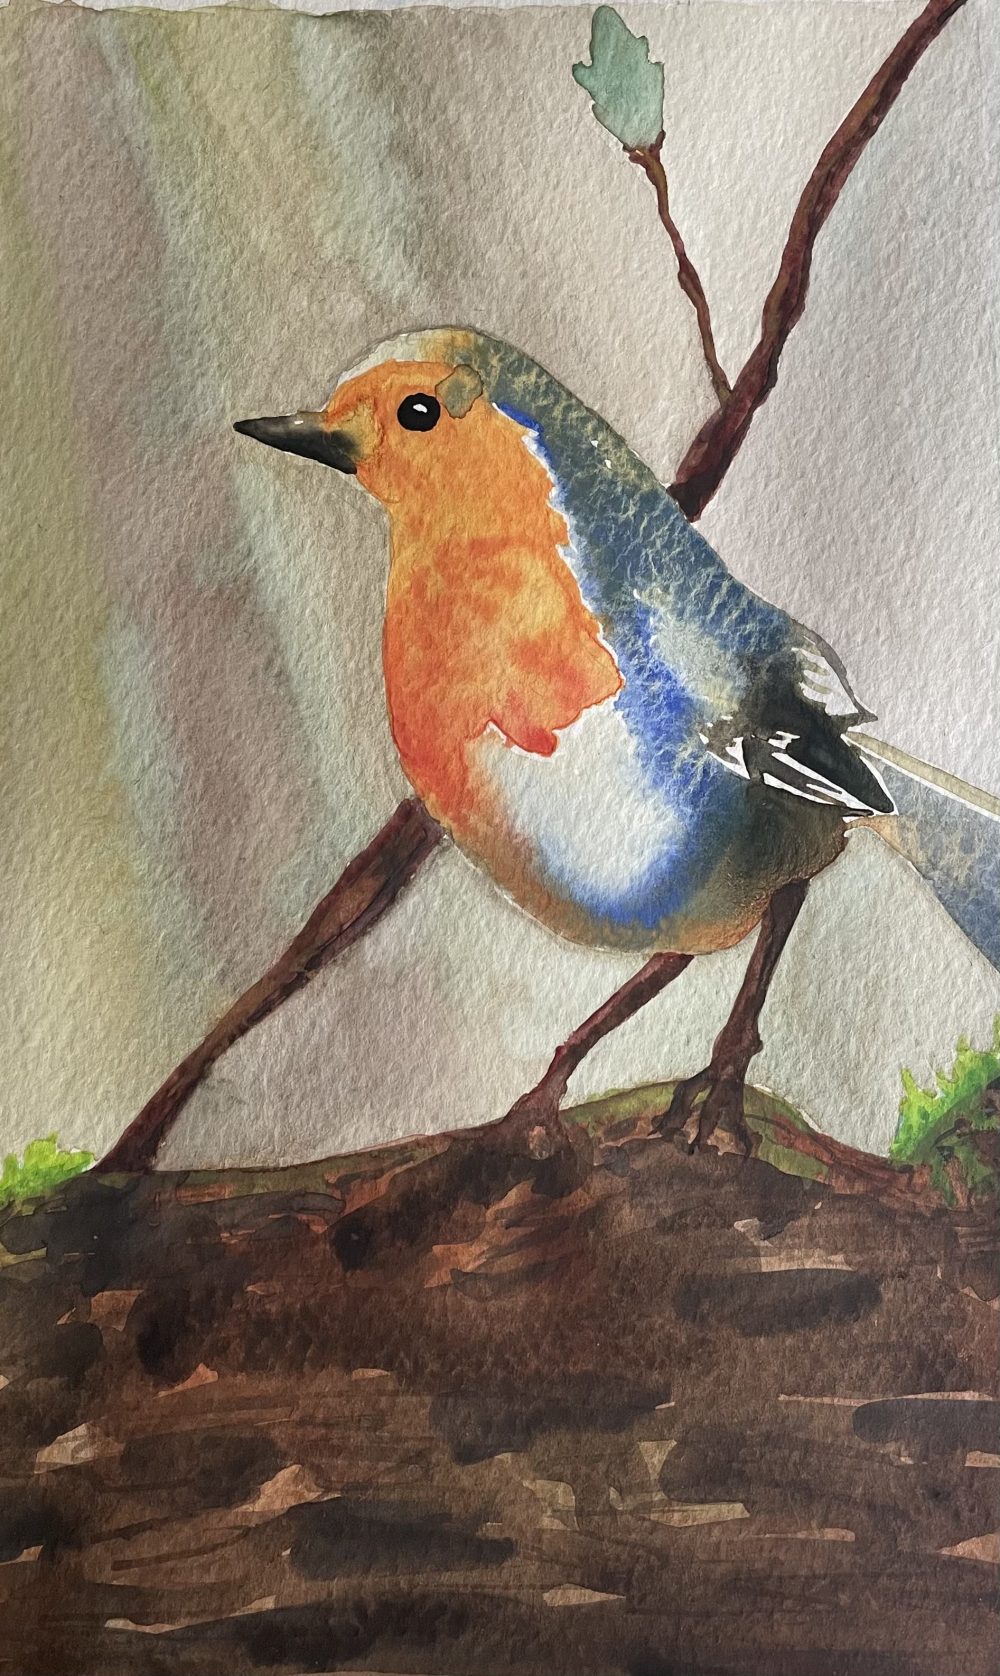 This is an image of a small blue and orange bird on a log with a twig and bud sticking out on a green and light brown washed background.